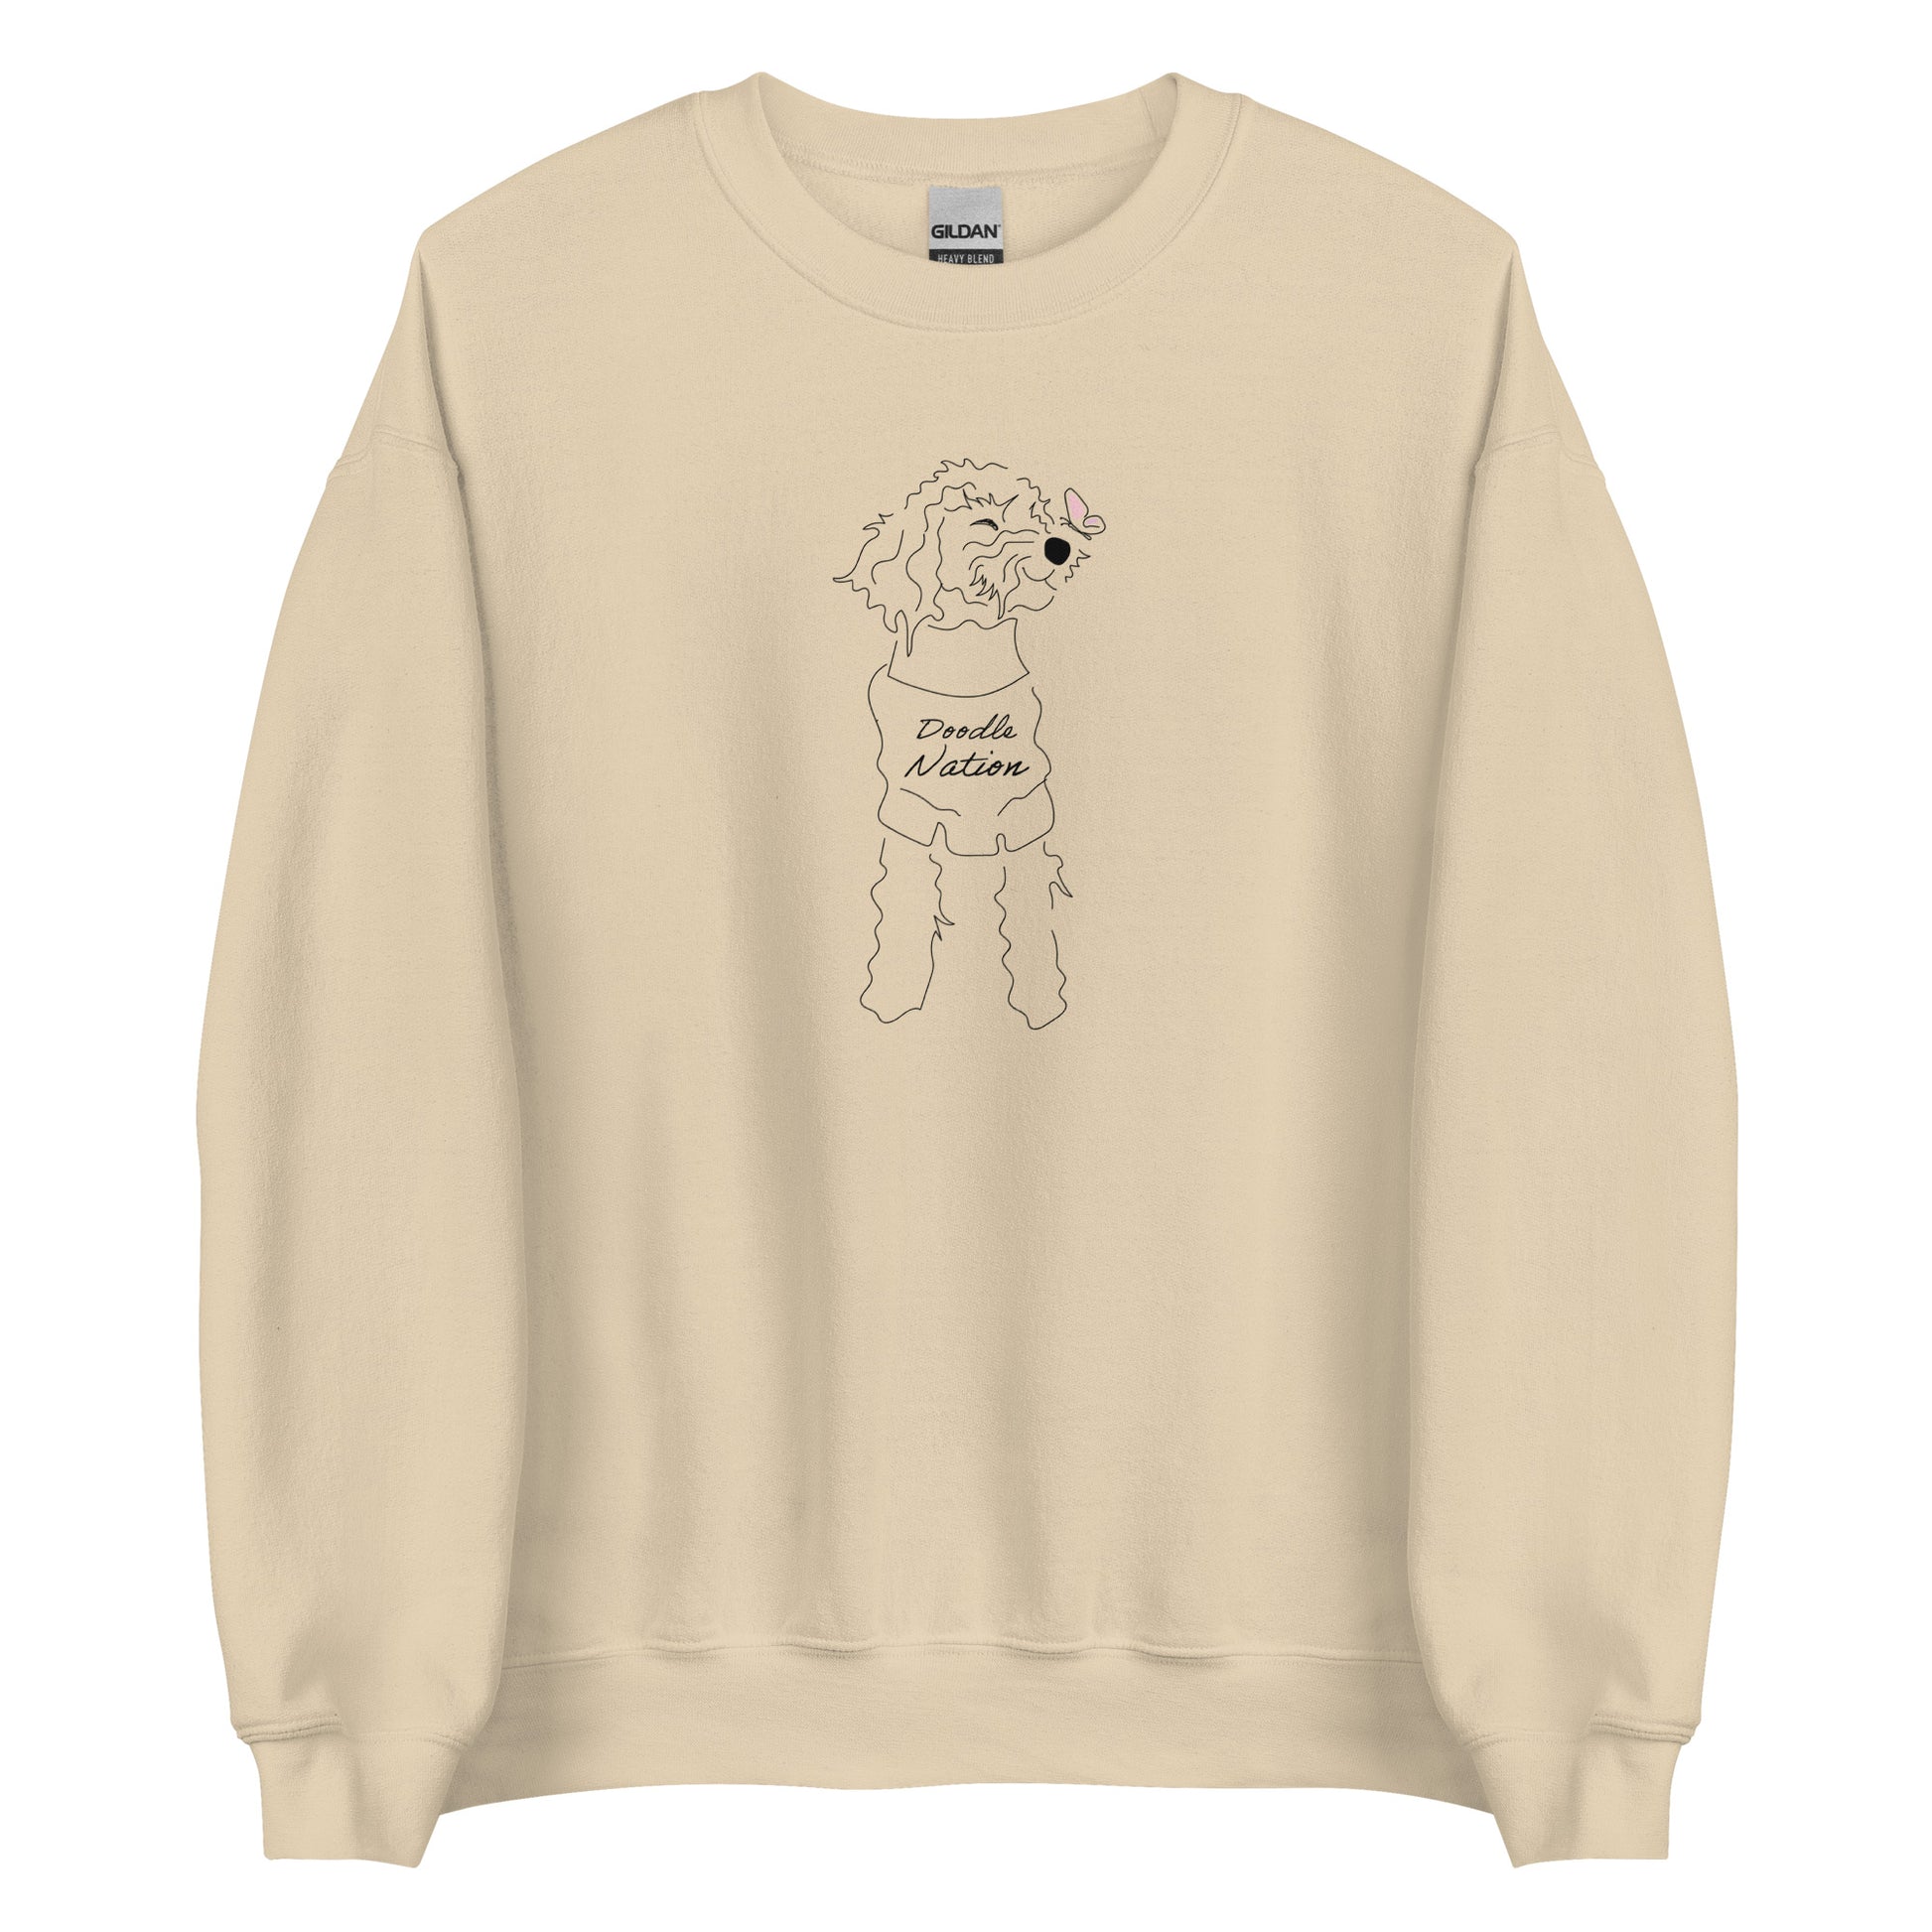 Goldendoodle crew neck sweatshirt with Goldendoodle dog face and words "Doodle Nation" in sand  color